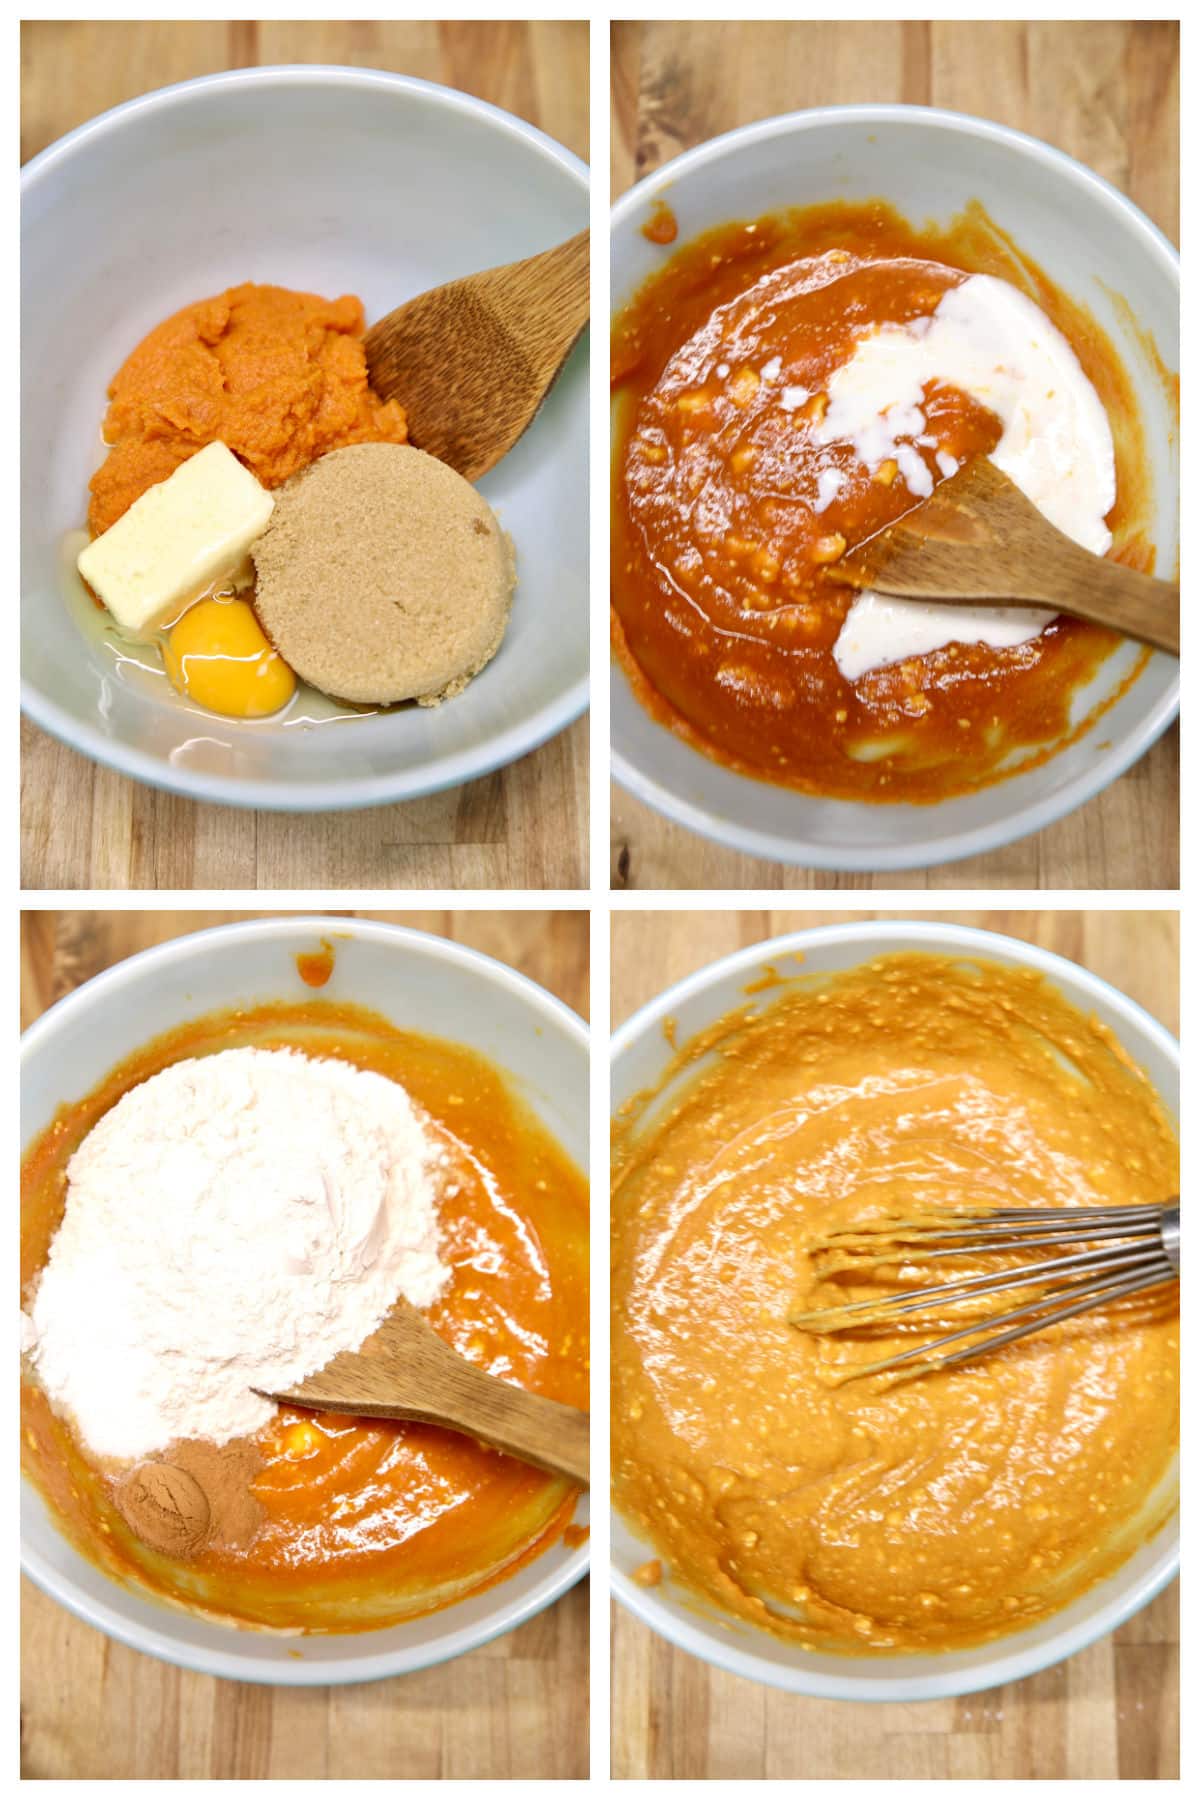 Pumpkin snack cake step by step mixing the batter.